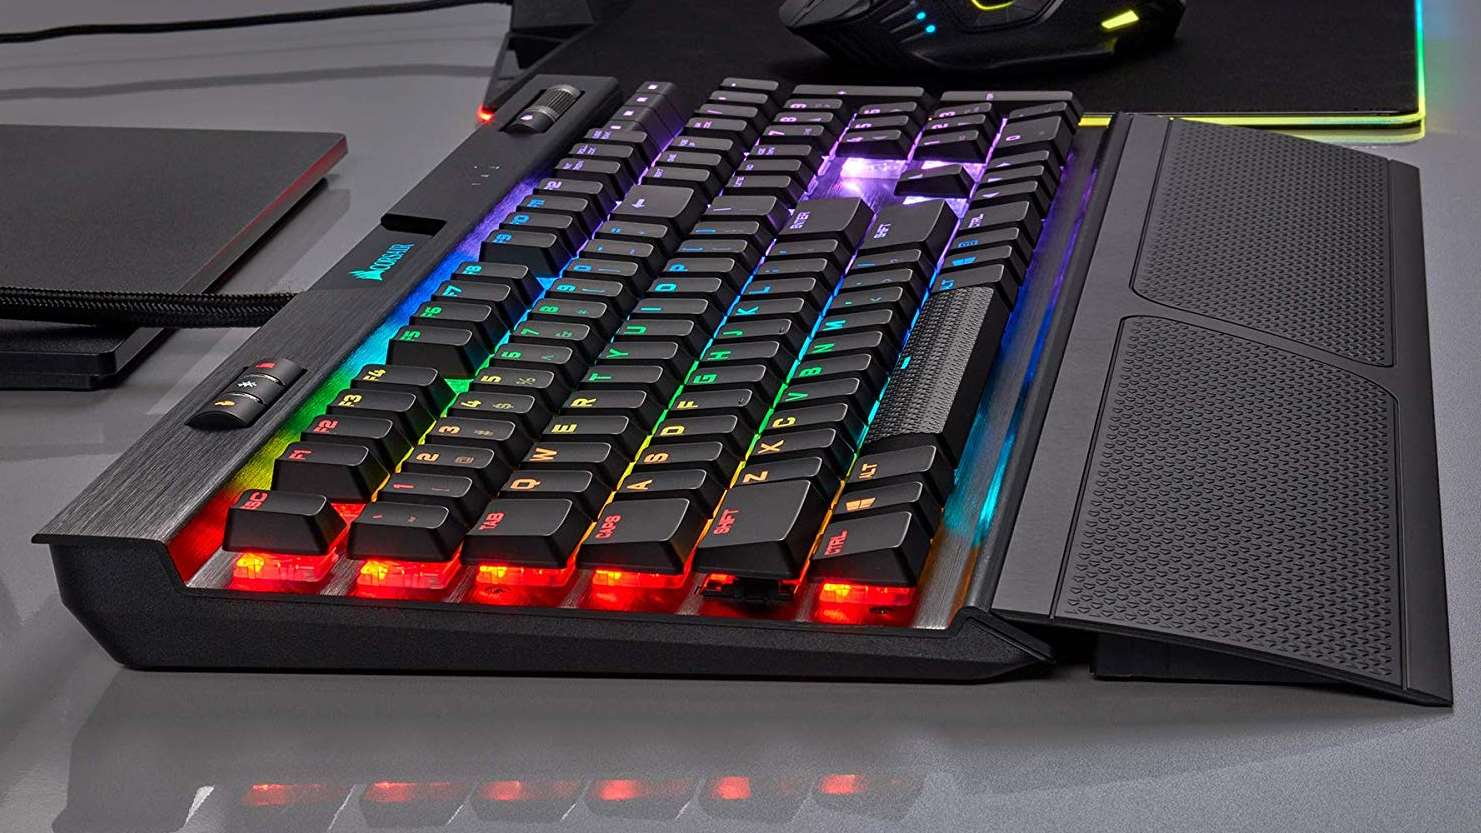 Corsair K70 RGB MK.2 Low Profile review: the best this gaming